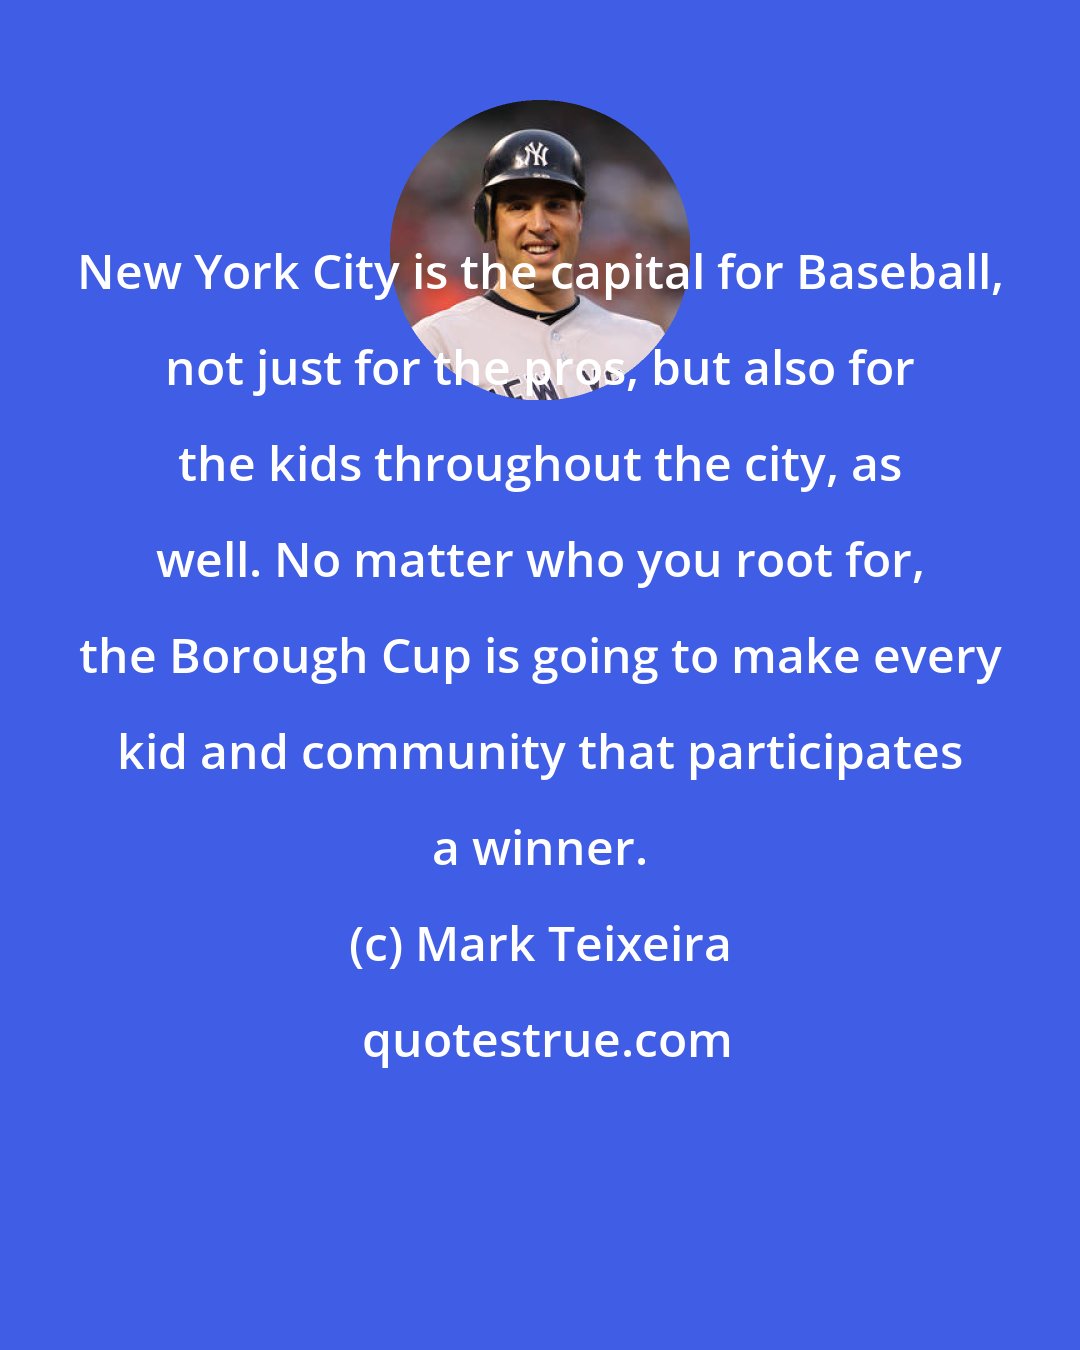 Mark Teixeira: New York City is the capital for Baseball, not just for the pros, but also for the kids throughout the city, as well. No matter who you root for, the Borough Cup is going to make every kid and community that participates a winner.